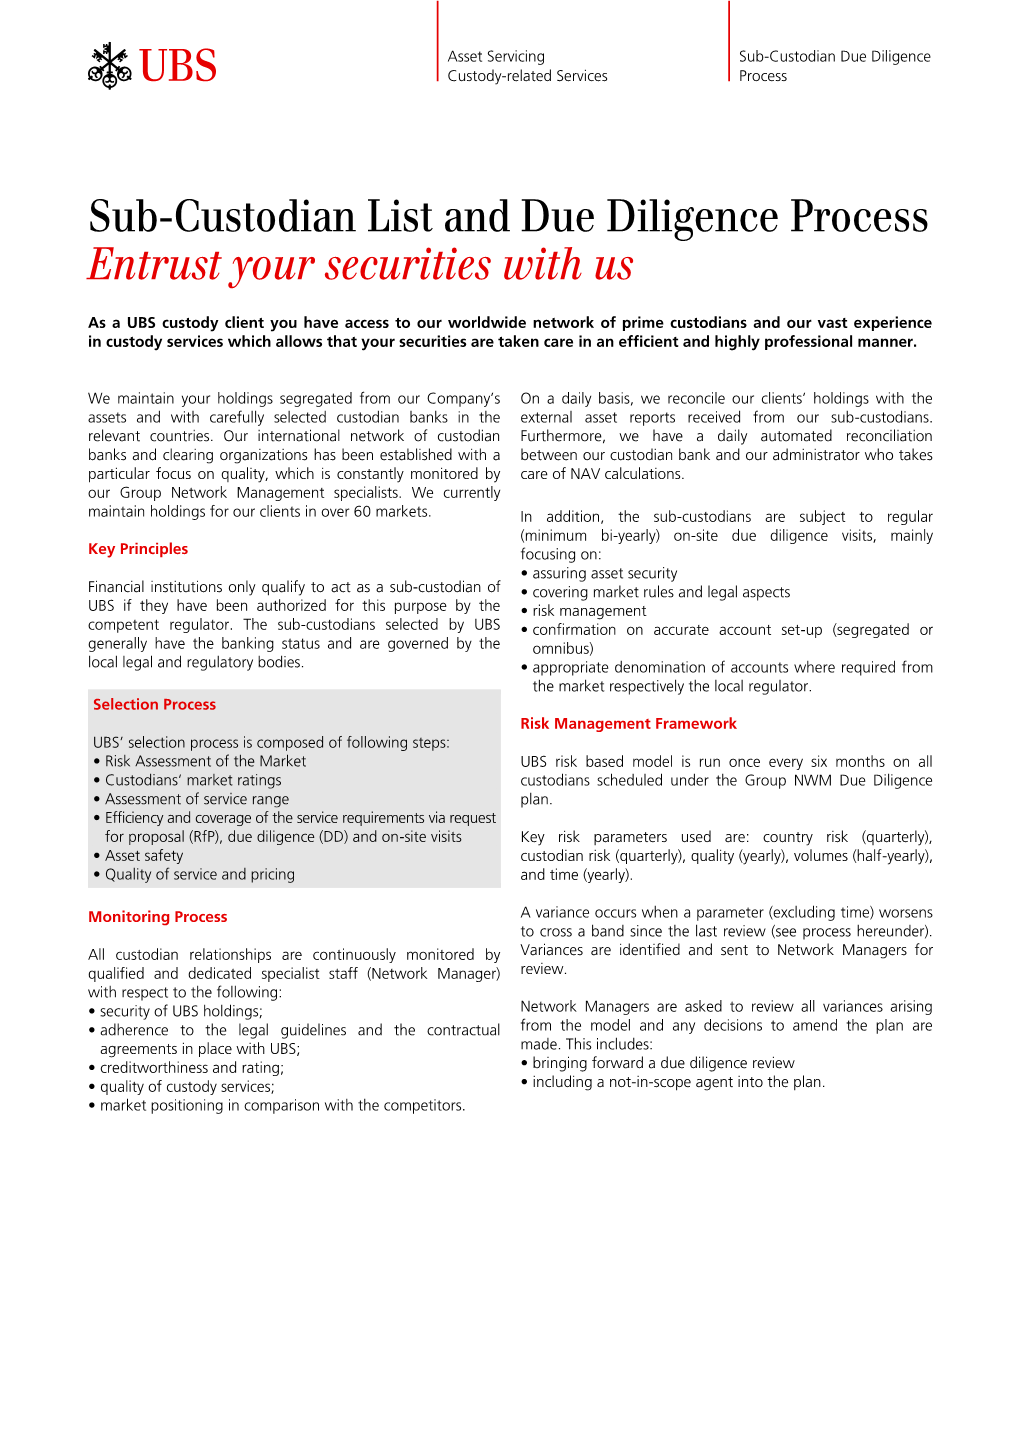 Sub-Custodian List and Due Diligence Process Entrust Your Securities with Us